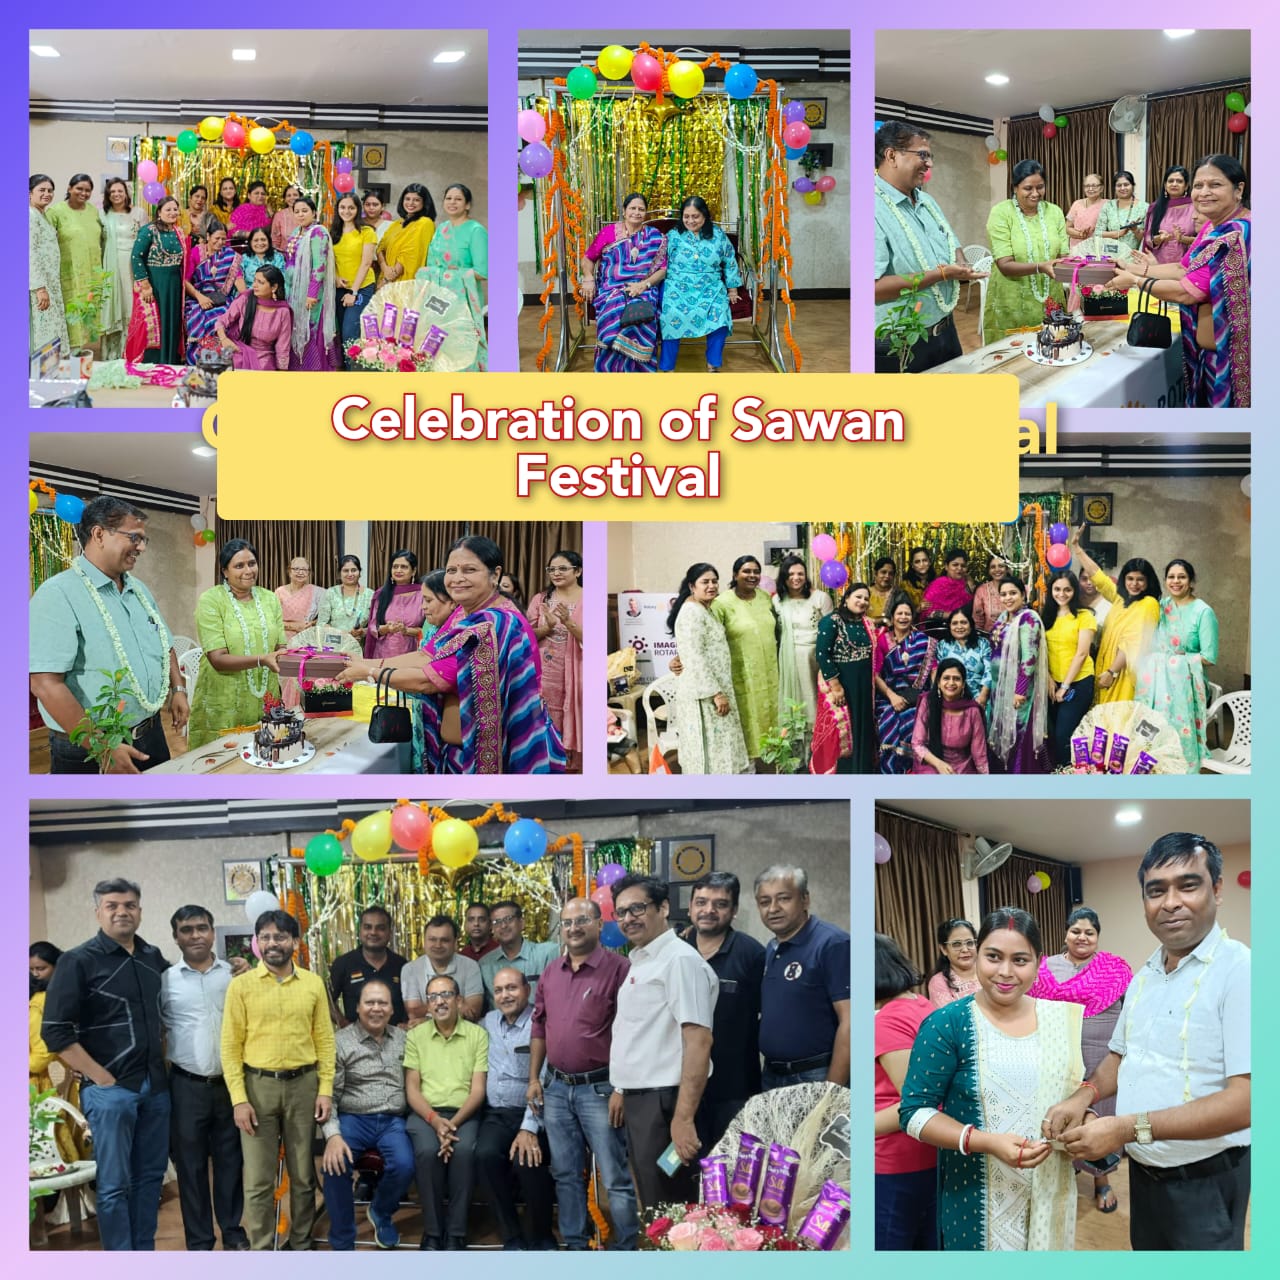 Celebration of Saawan Festival at our club premises followed by Rotary family get-together and cultural program